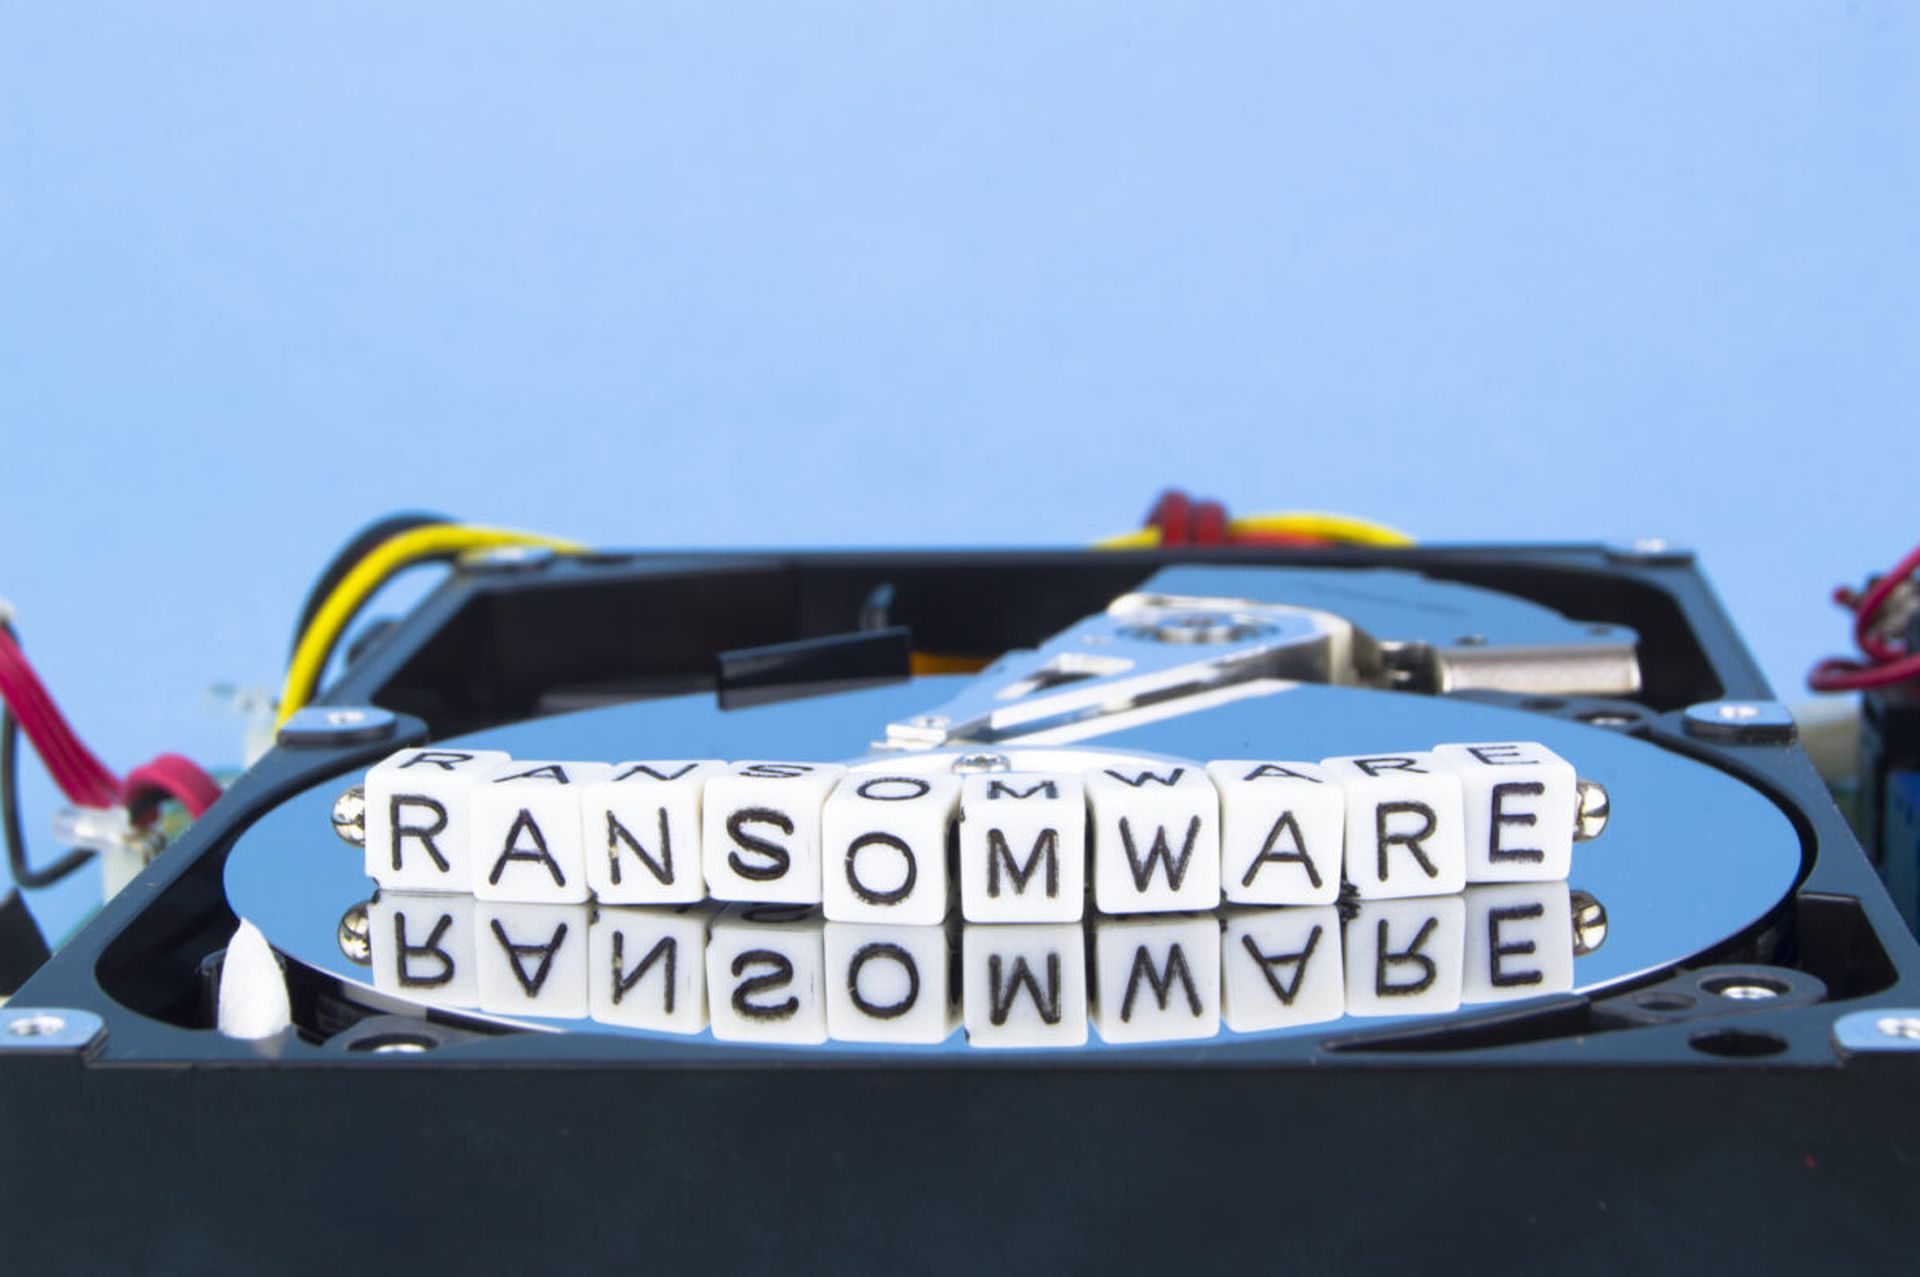 For its latest State of the Internet report, Akamai researchers analyzed victim details posted to the leak sites of about 90 ransomware groups over a 20-month period from October 2021 to May 2023. (Image Credit: Luis Diaz Devesa via Getty Images)